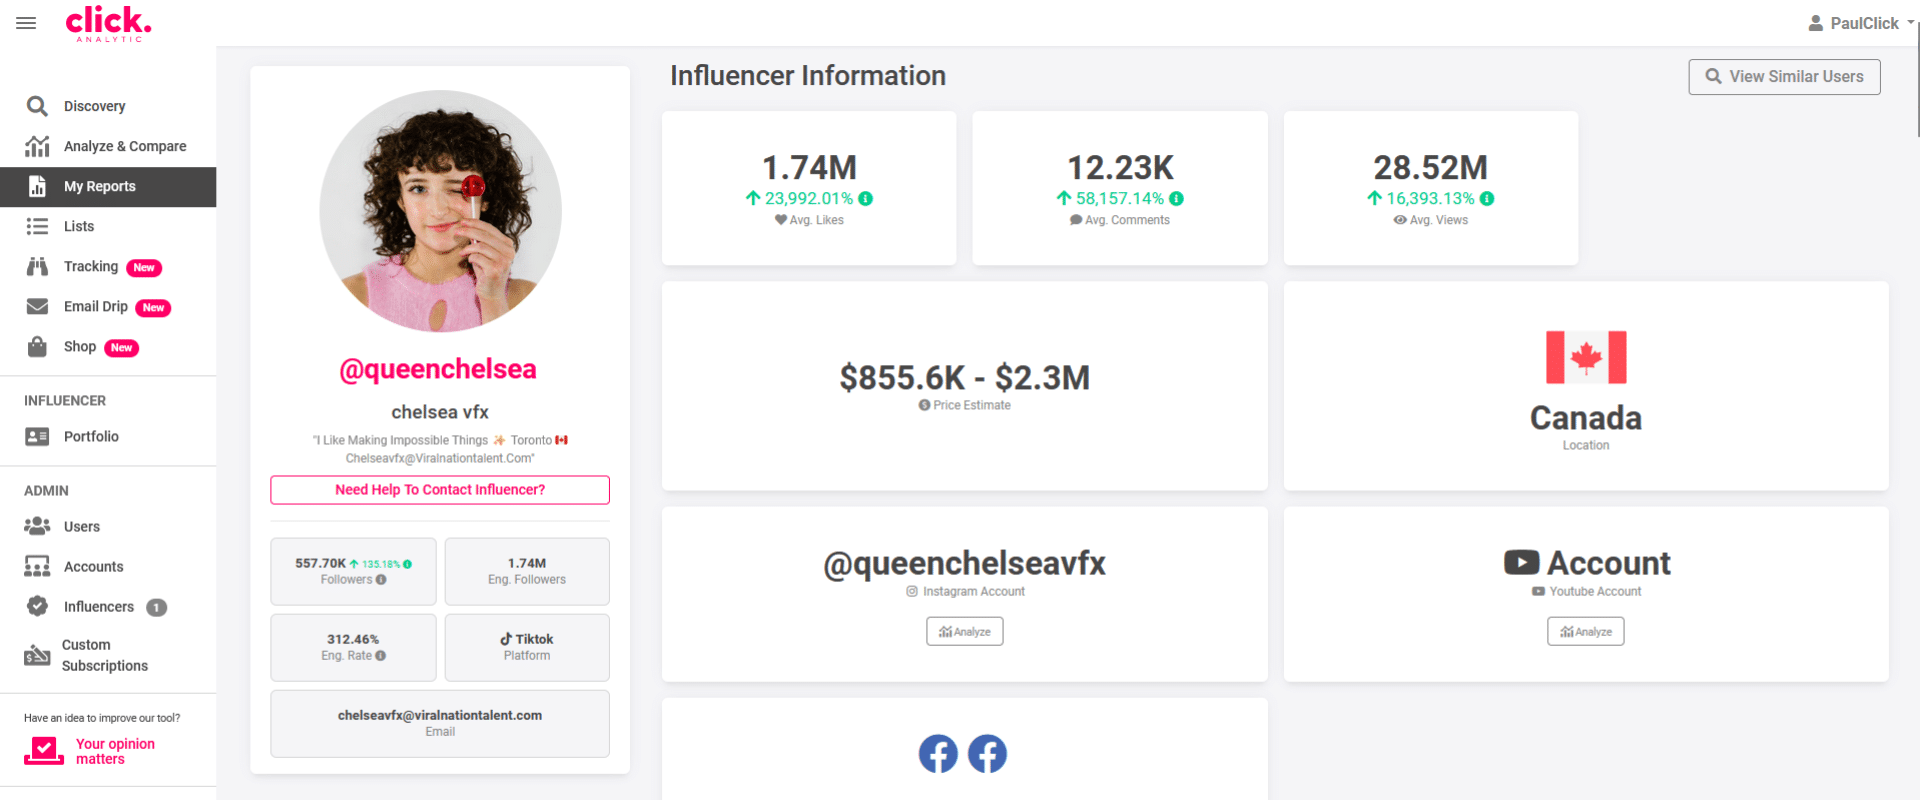 A screenshot of an influencer analytics dashboard displaying statistics such as follower count, engagement rate, and estimated earnings, with a focus on a profile from Canada under the username "ChelseaVFX".